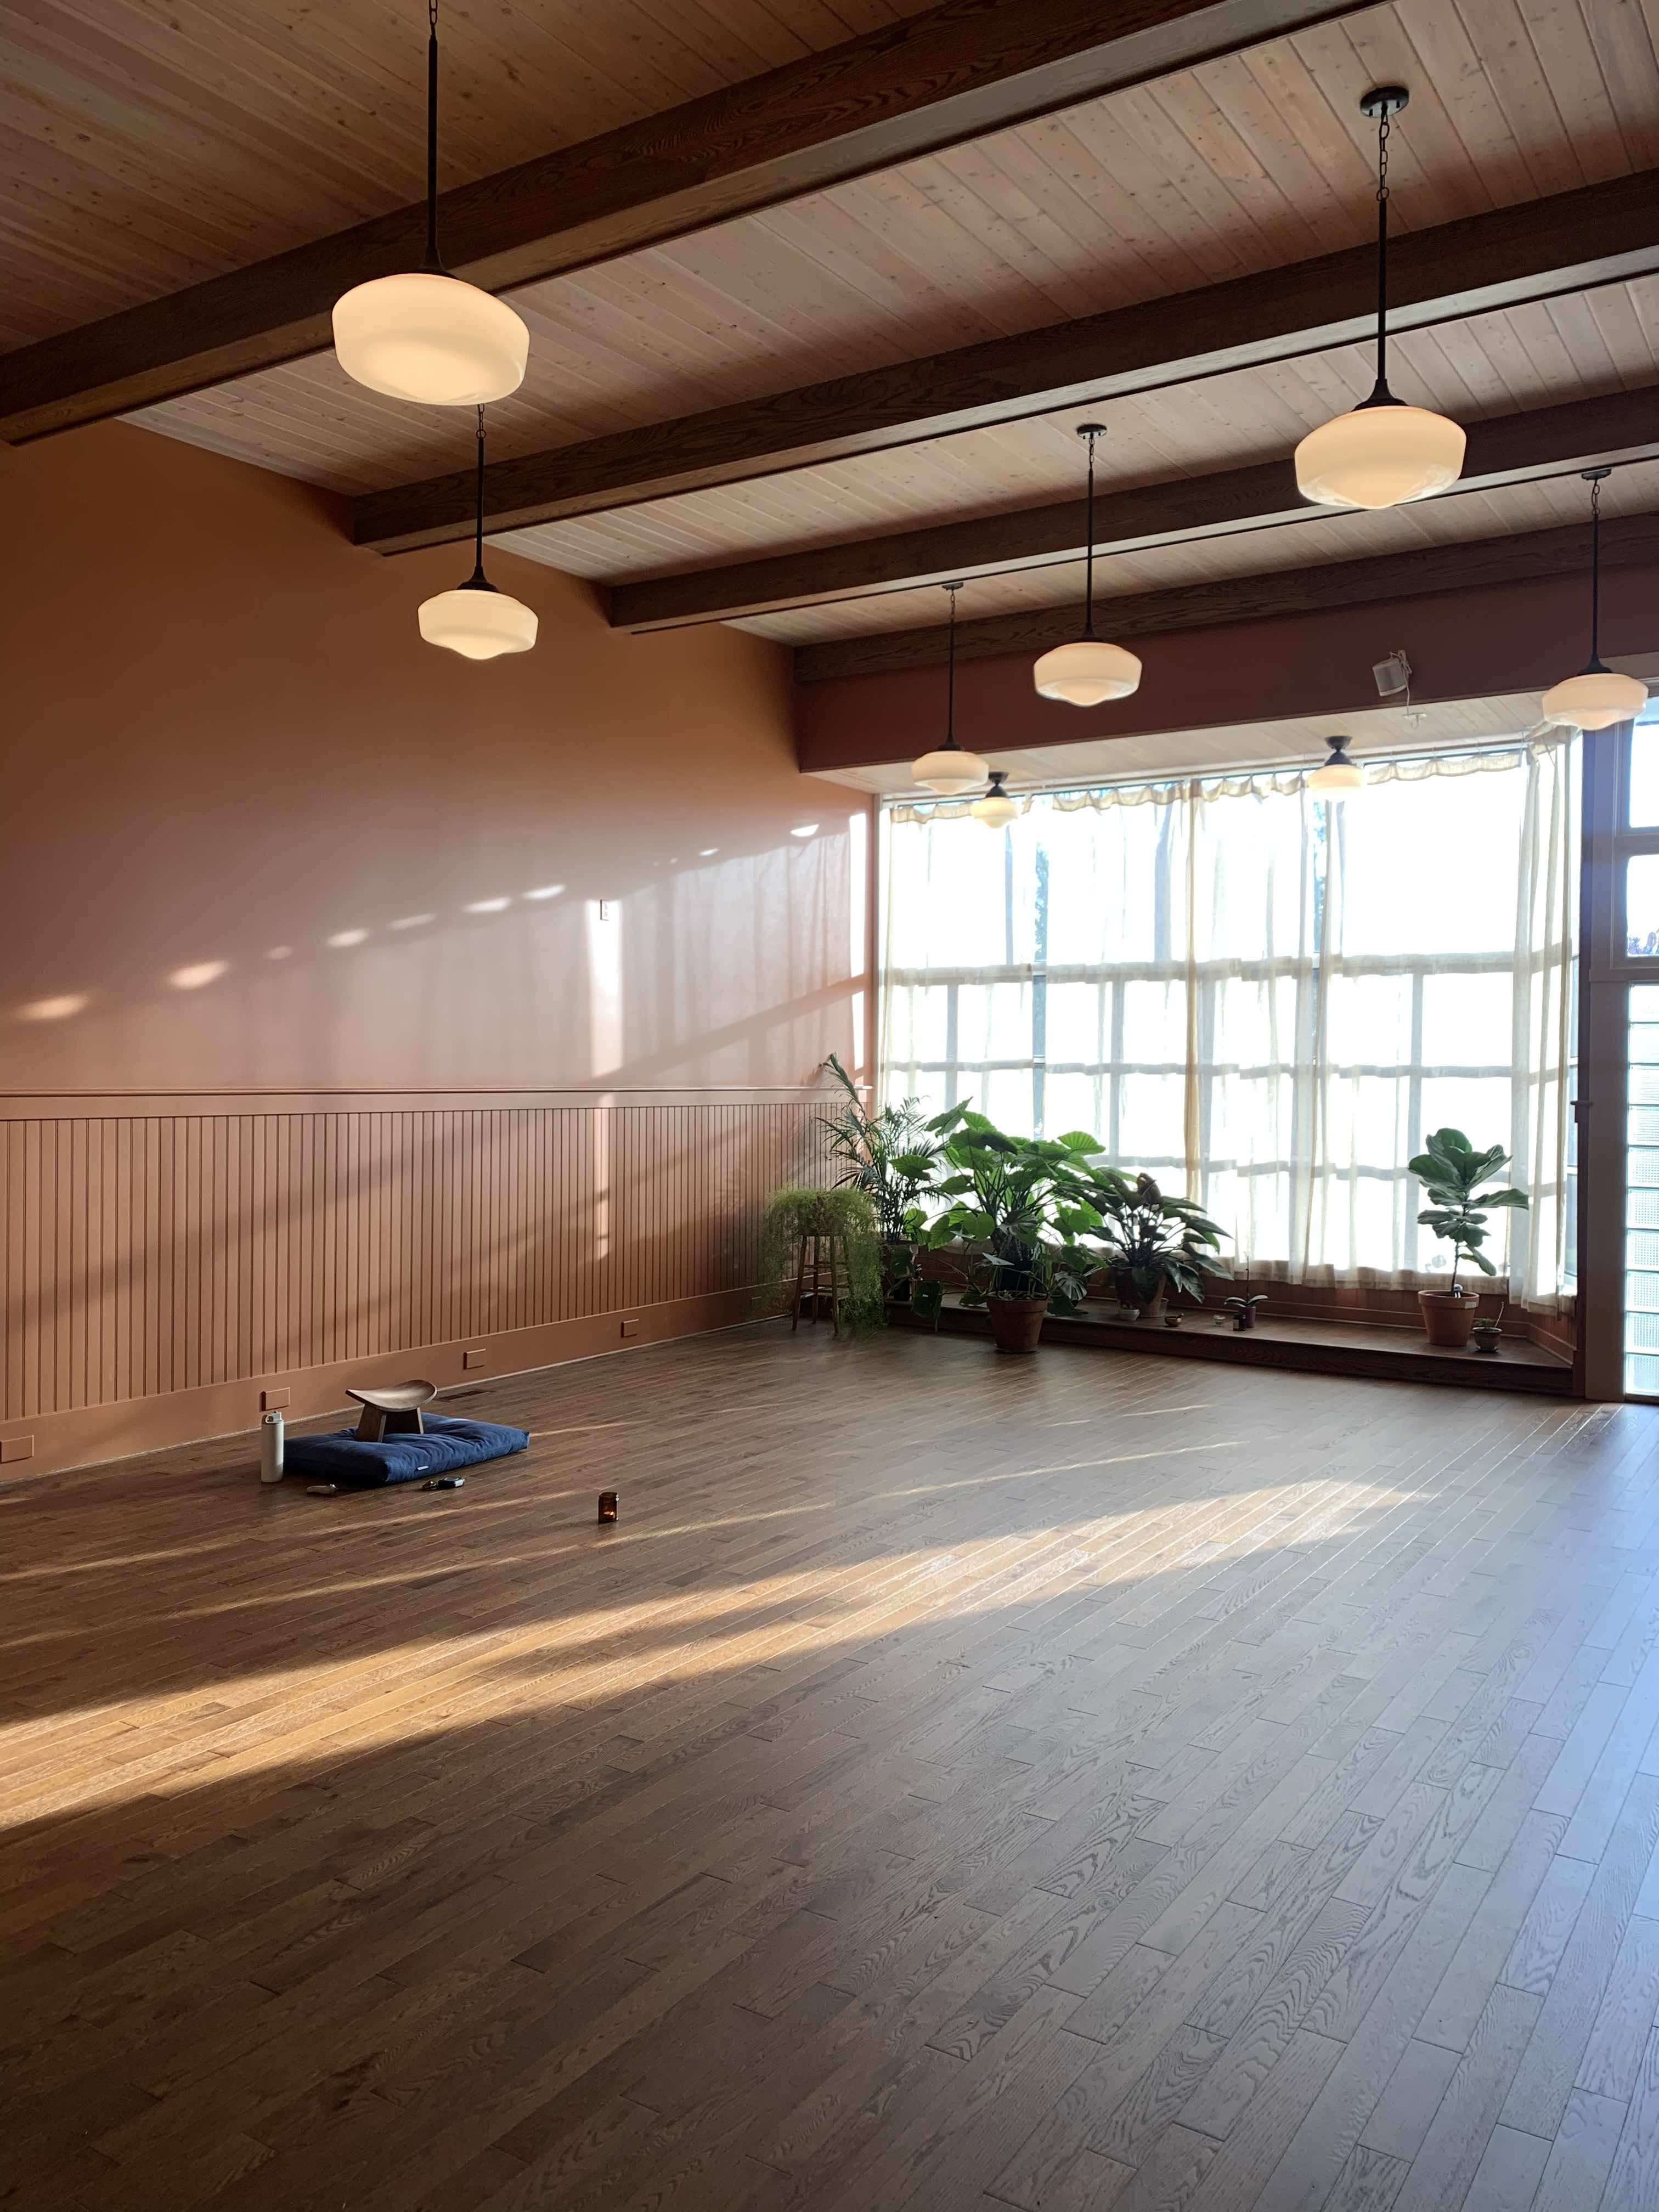 Photo of Marigold Studio interior with large windows, plants, terra cotta color walls, and a meditation cushion.